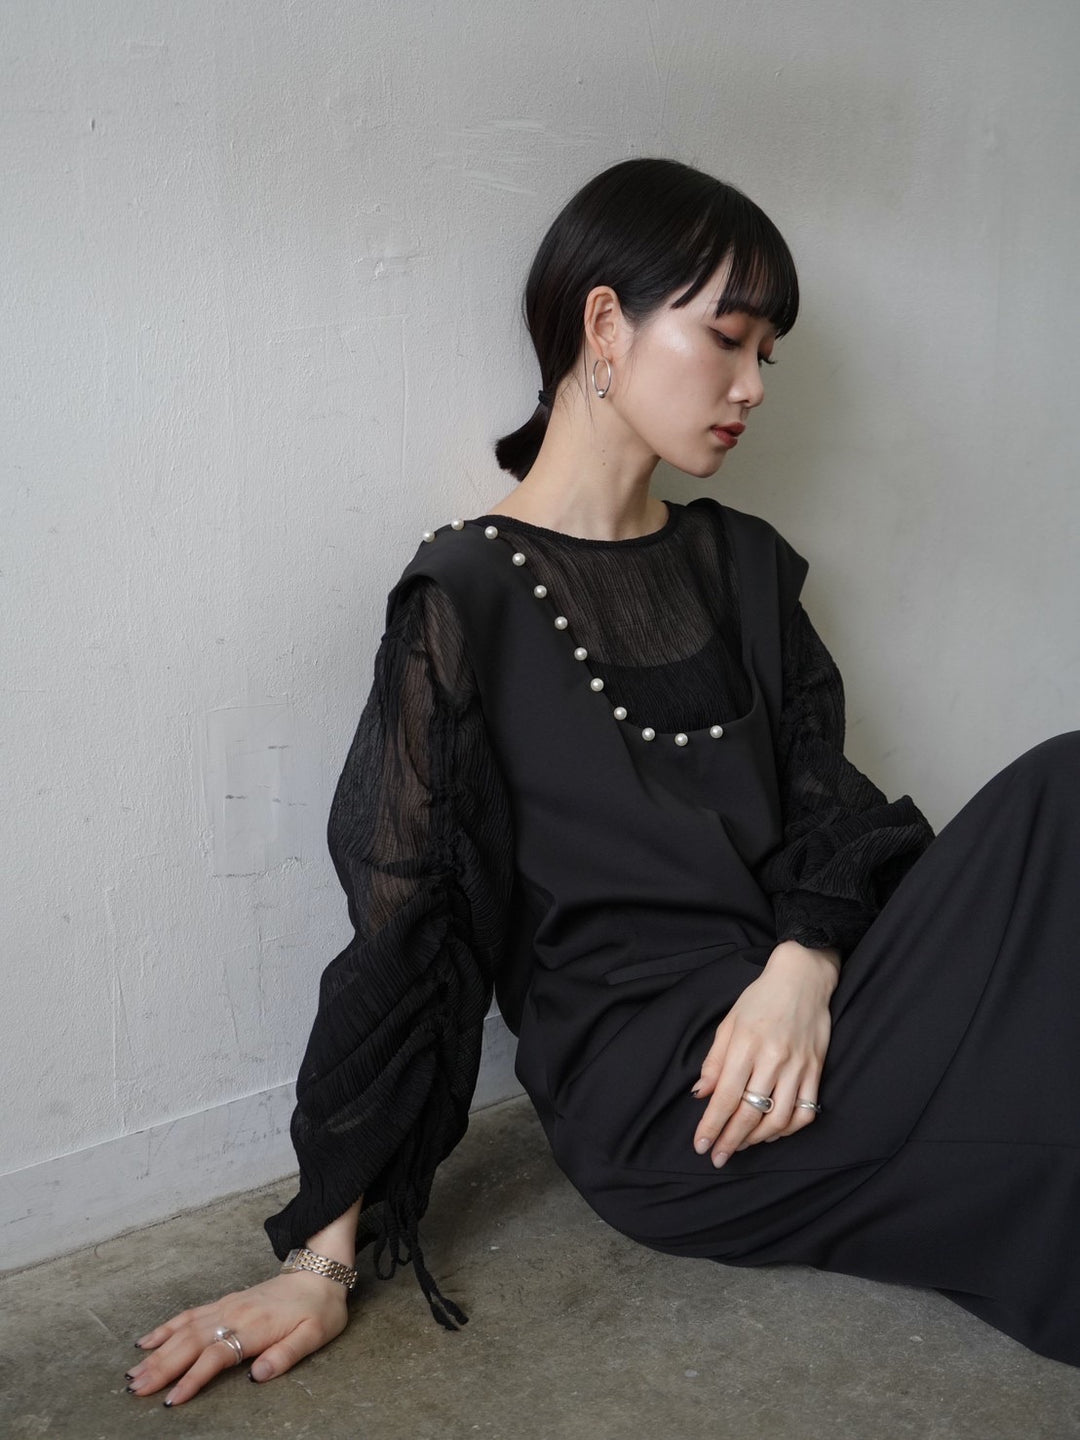 Willow sheer shirred sleeve over top/black